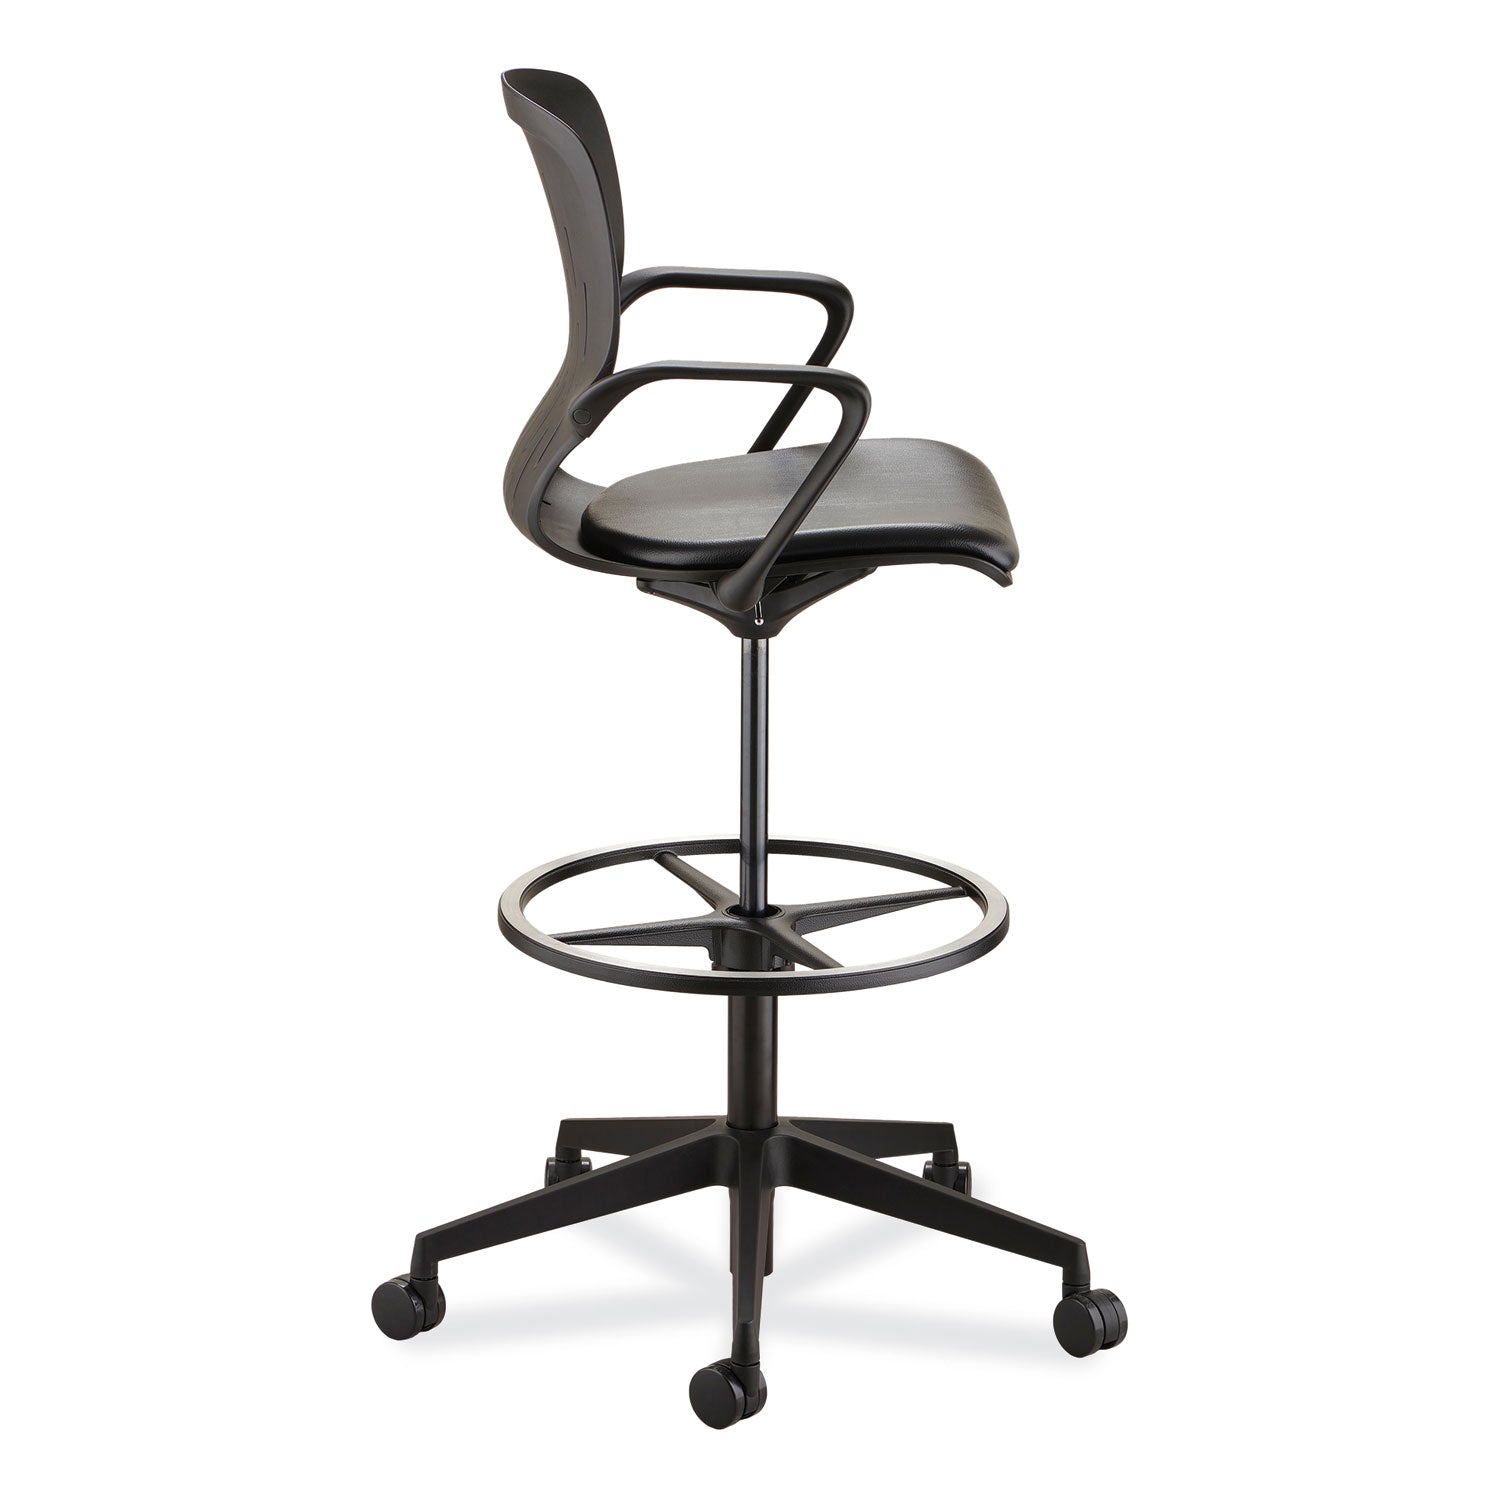 shell-extended-height-chair-supports-up-to-275-lb-22-to-32-high-black-seat-black-back-base-ships-in-1-3-business-days_saf7014bl - 2